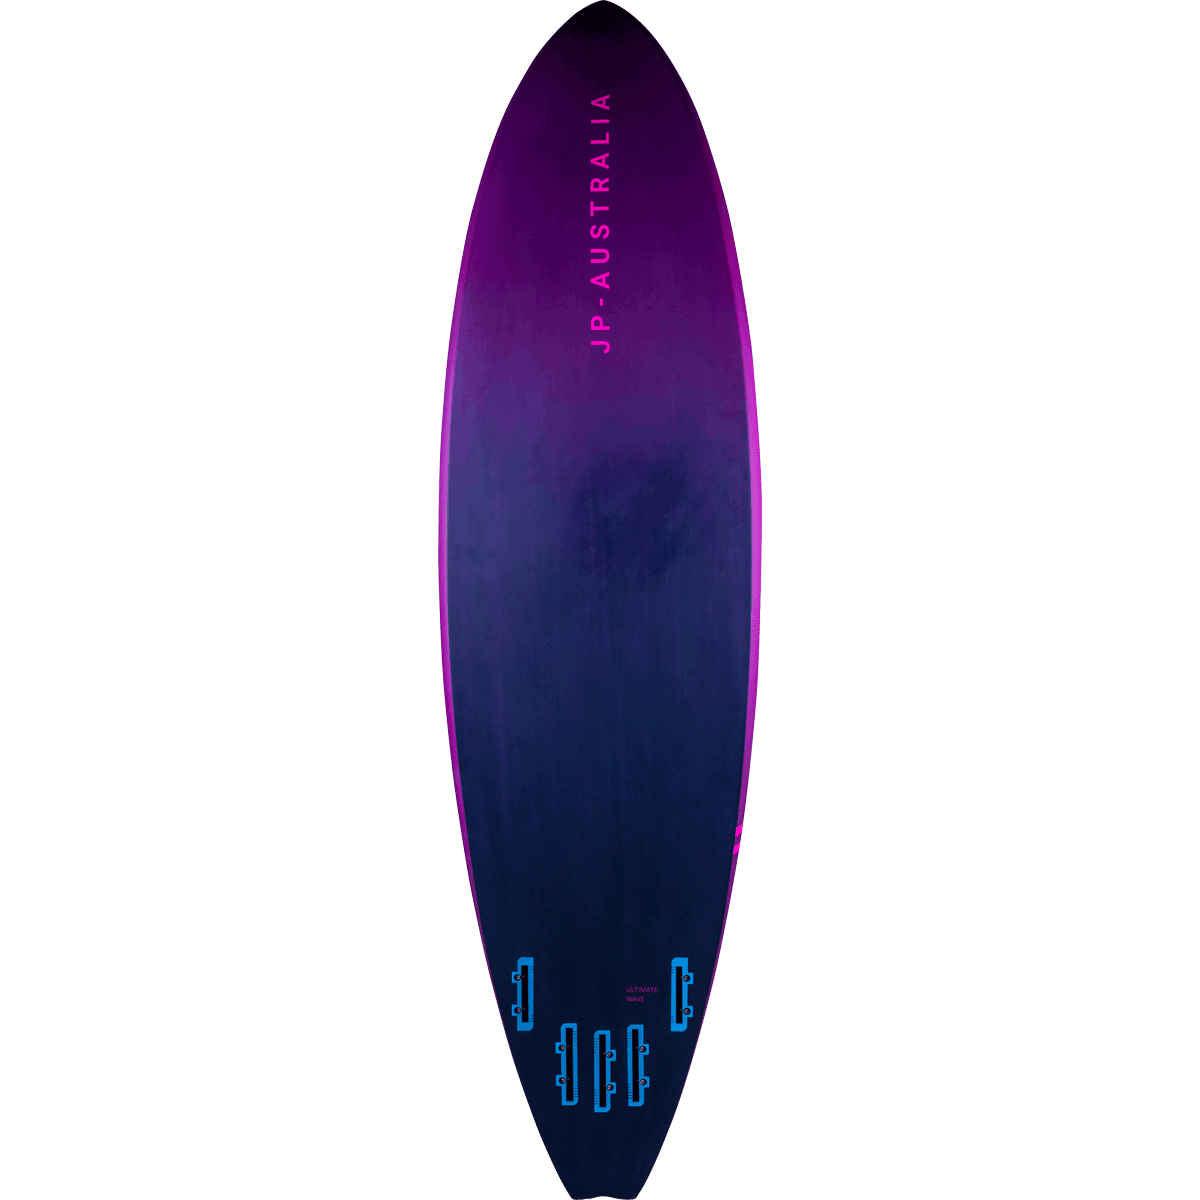 JP Ultimate Wave Pro 2024 Board - Poole Harbour Watersports